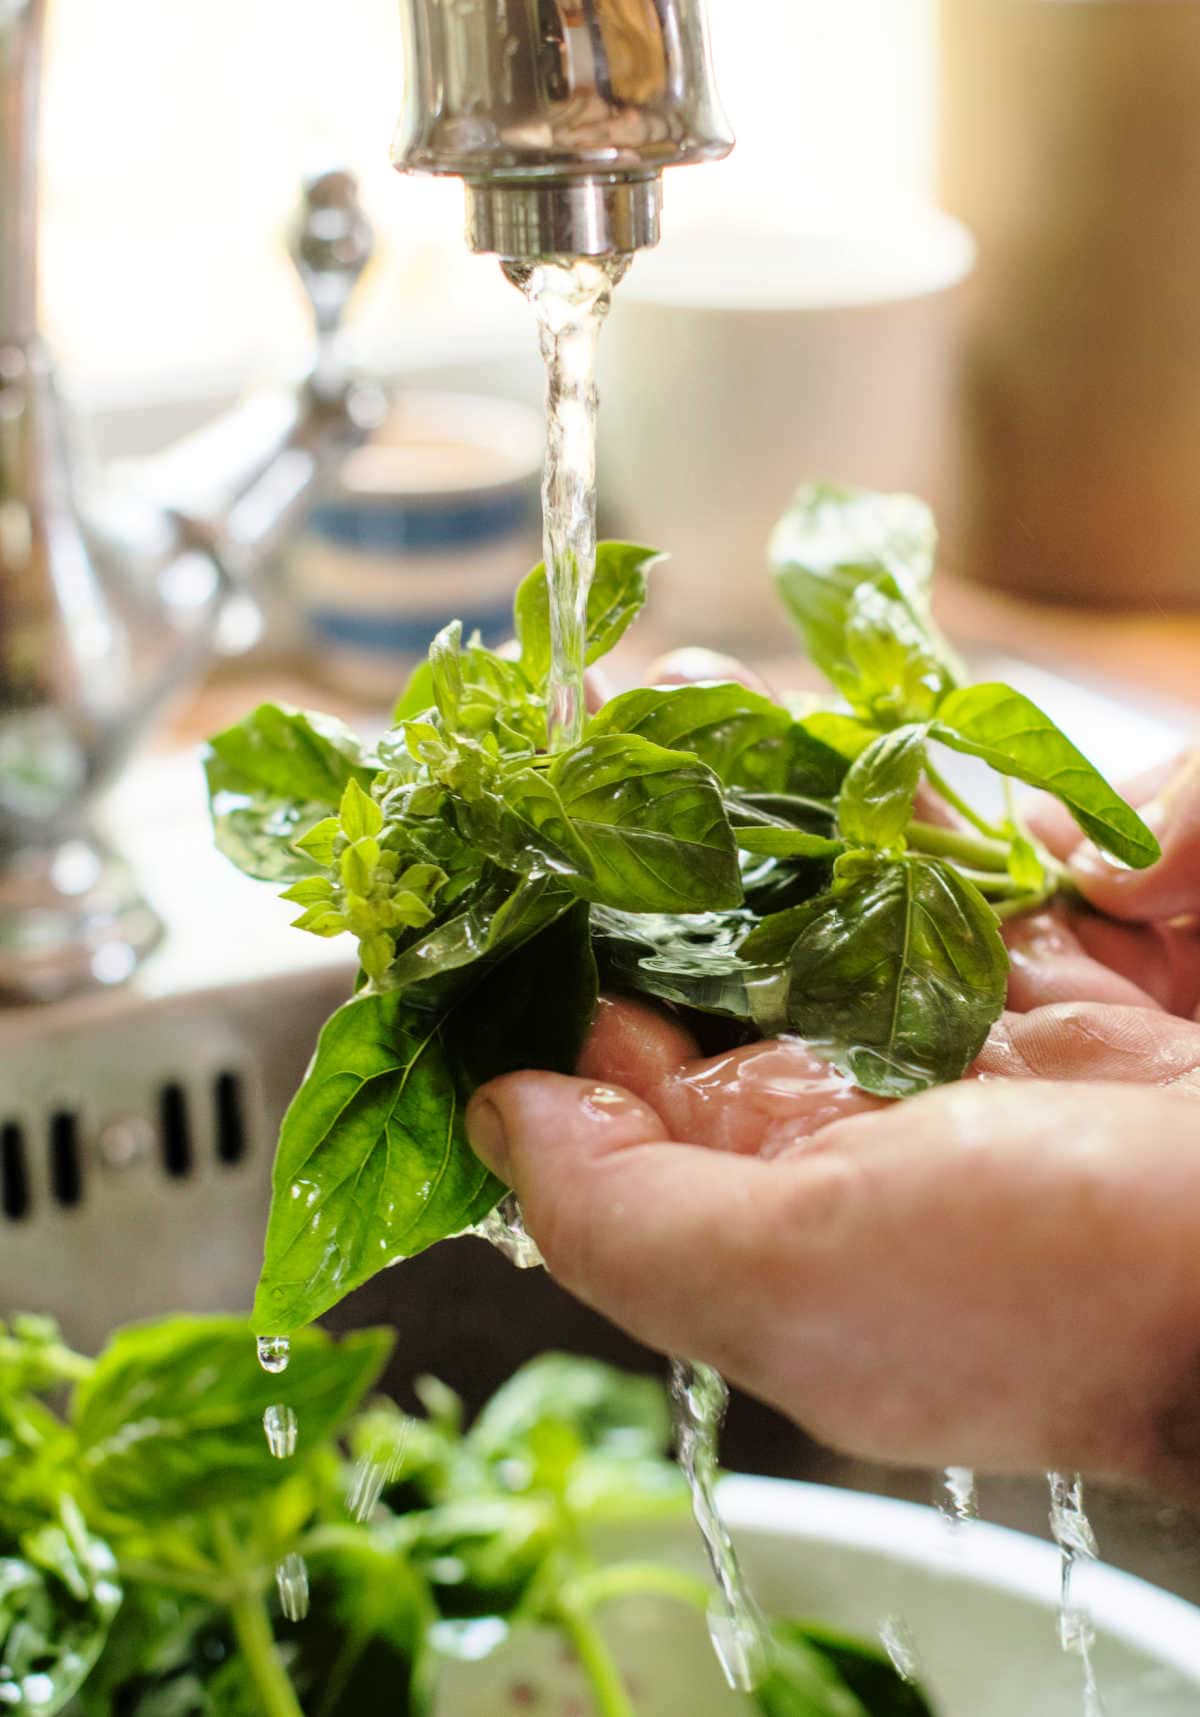 washing basil leaves in the sink with water